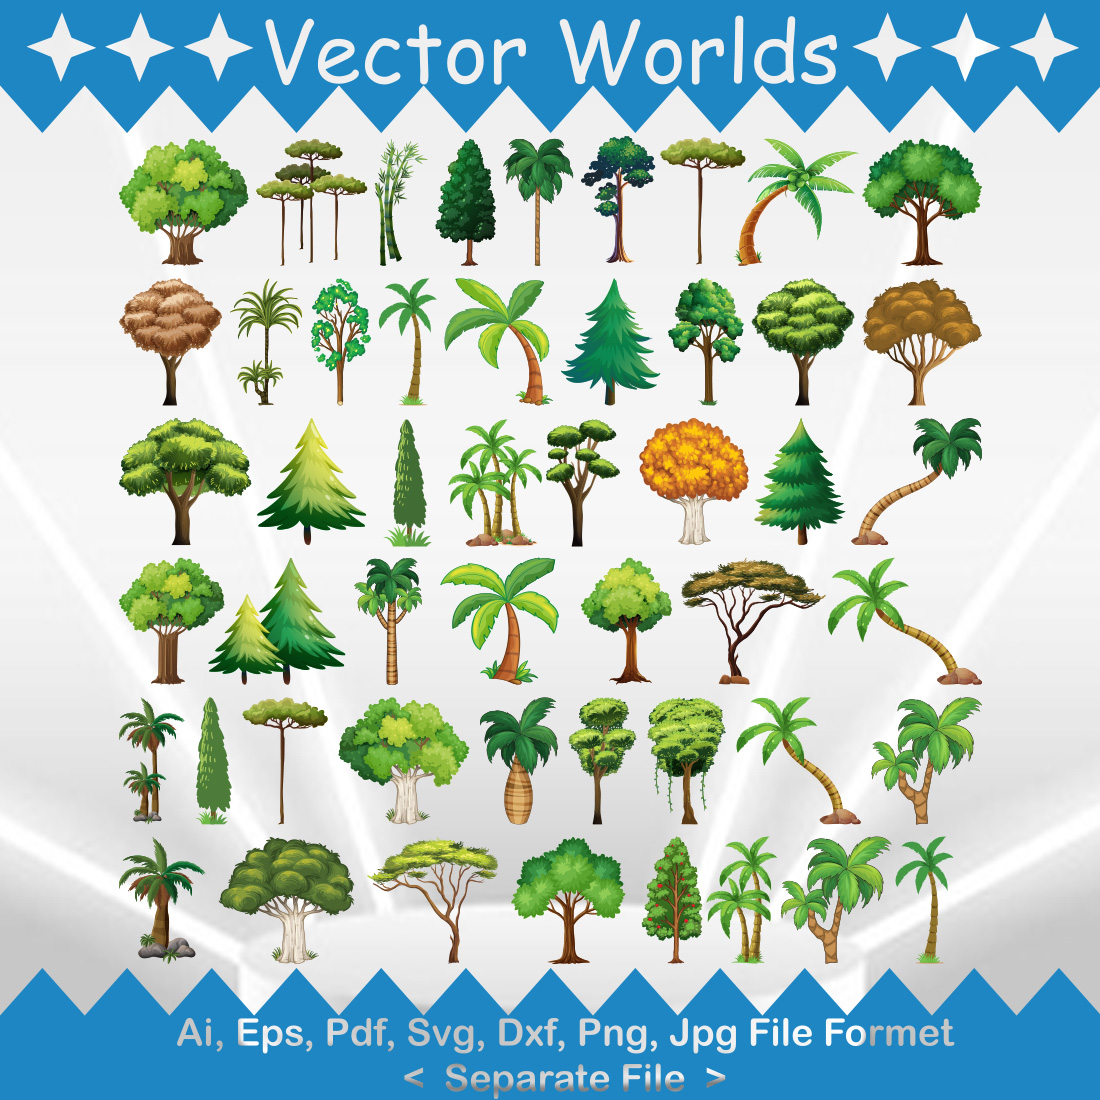 Planet Tree SVG Vector Design cover image.